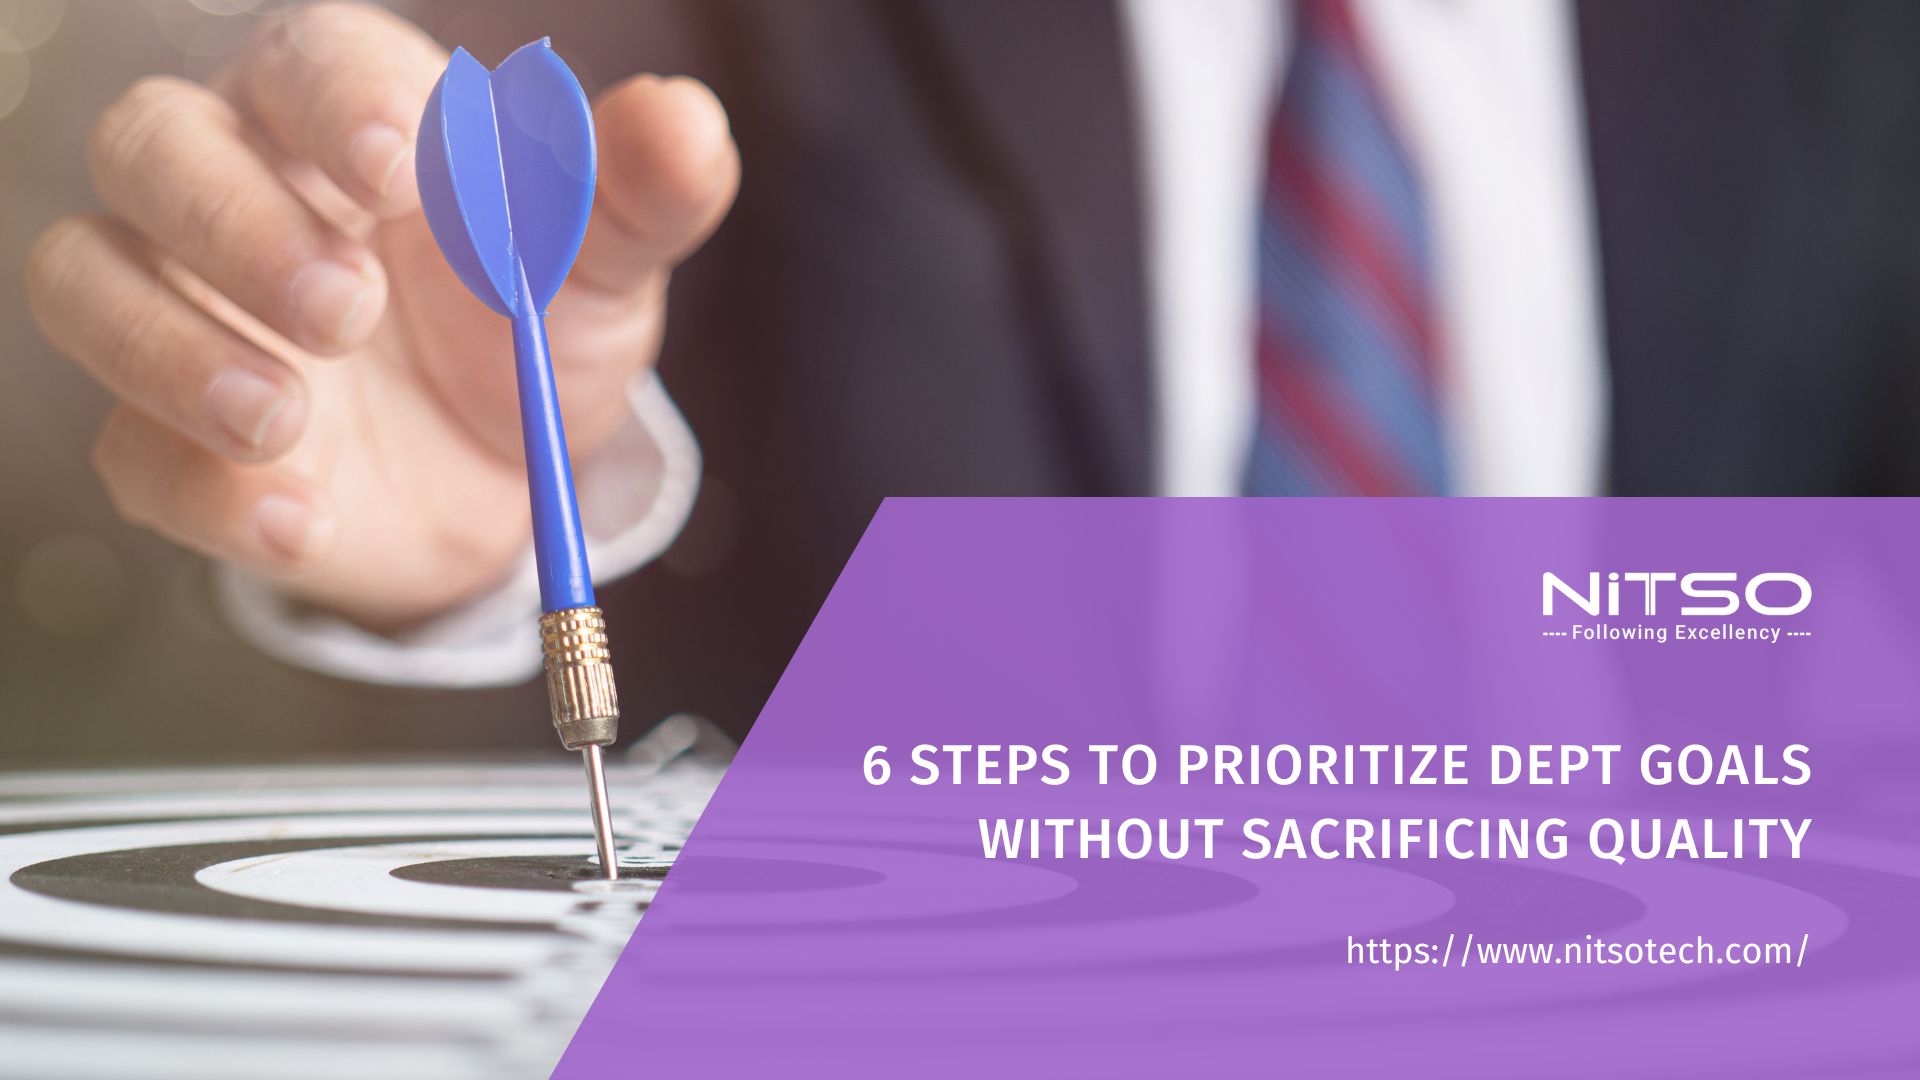 6 Steps to Prioritize Dept Goals Without Sacrificing Quality